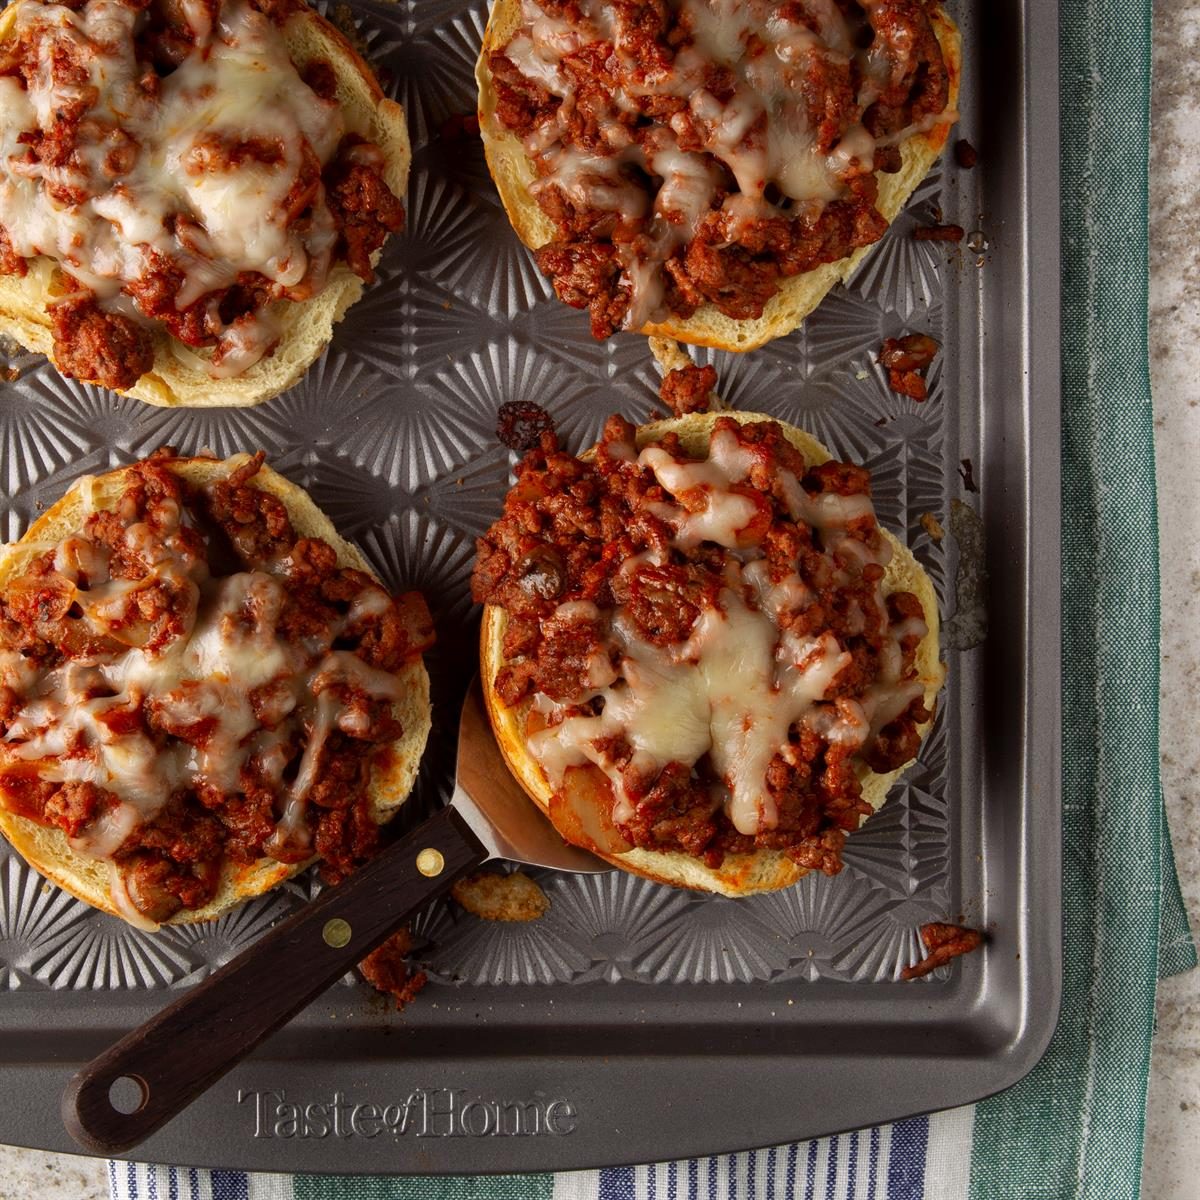 <p>I'm not sure where I first saw this pizza burger recipe, but I'm glad I did! My family requests this meal often. A dash of oregano livens up canned pizza sauce. —Sharon Schwartz, Burlington, Wisconsin</p> <div class="listicle-page__buttons"> <div class="listicle-page__cta-button"><a href='https://www.tasteofhome.com/recipes/open-faced-pizza-burgers/'>Go to Recipe</a></div> </div>